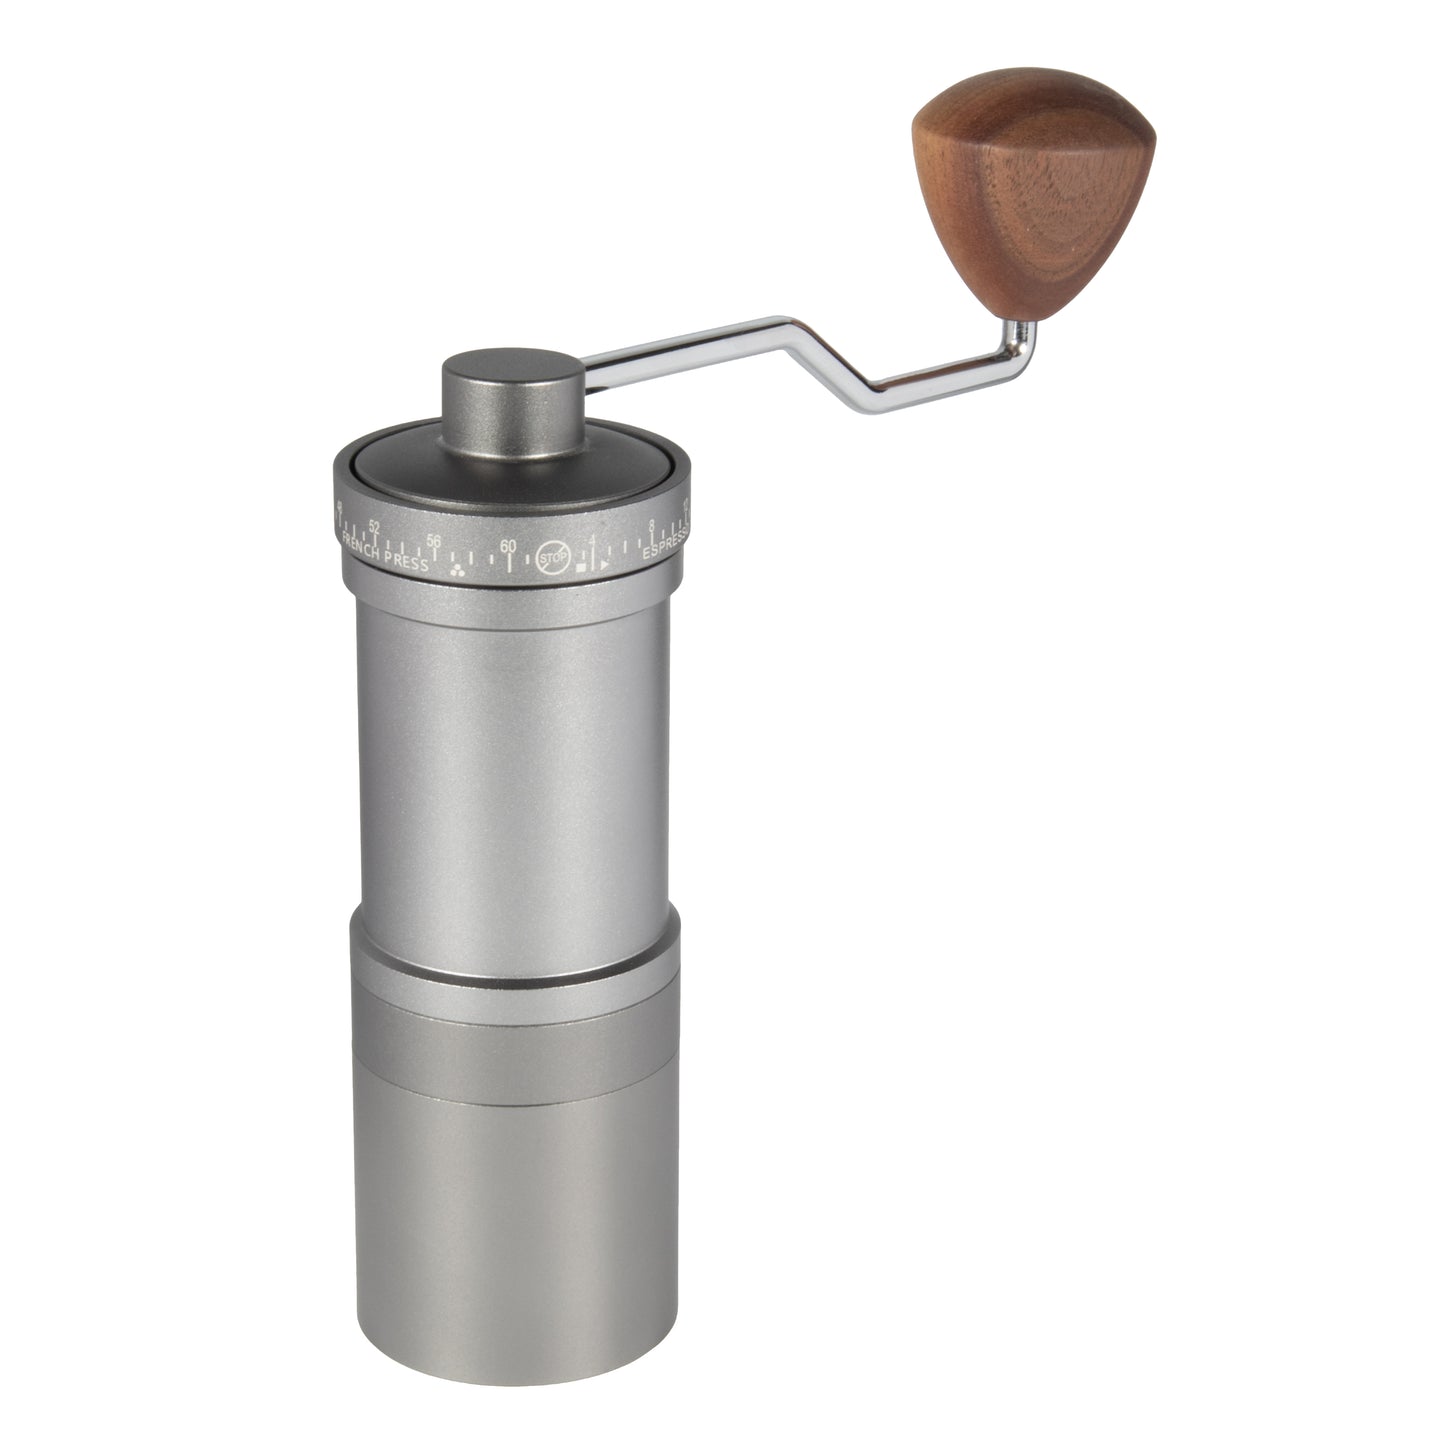 Hand Coffee Grinder Stainless Steel Portable Aluminium Alloy Manual Maker Camping